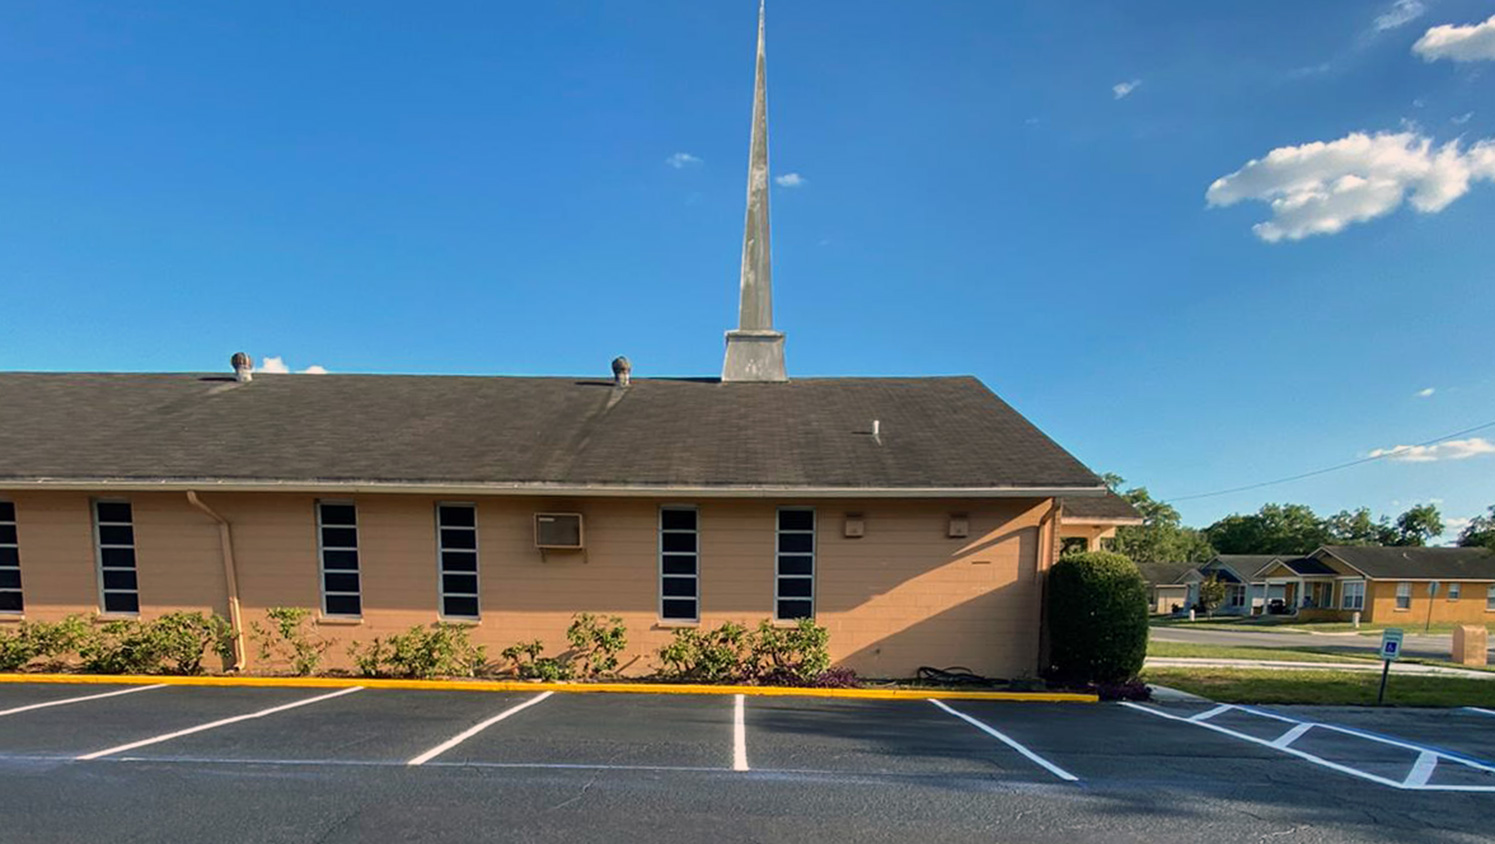 newly striped parking spaces at a Lakeland, FL church